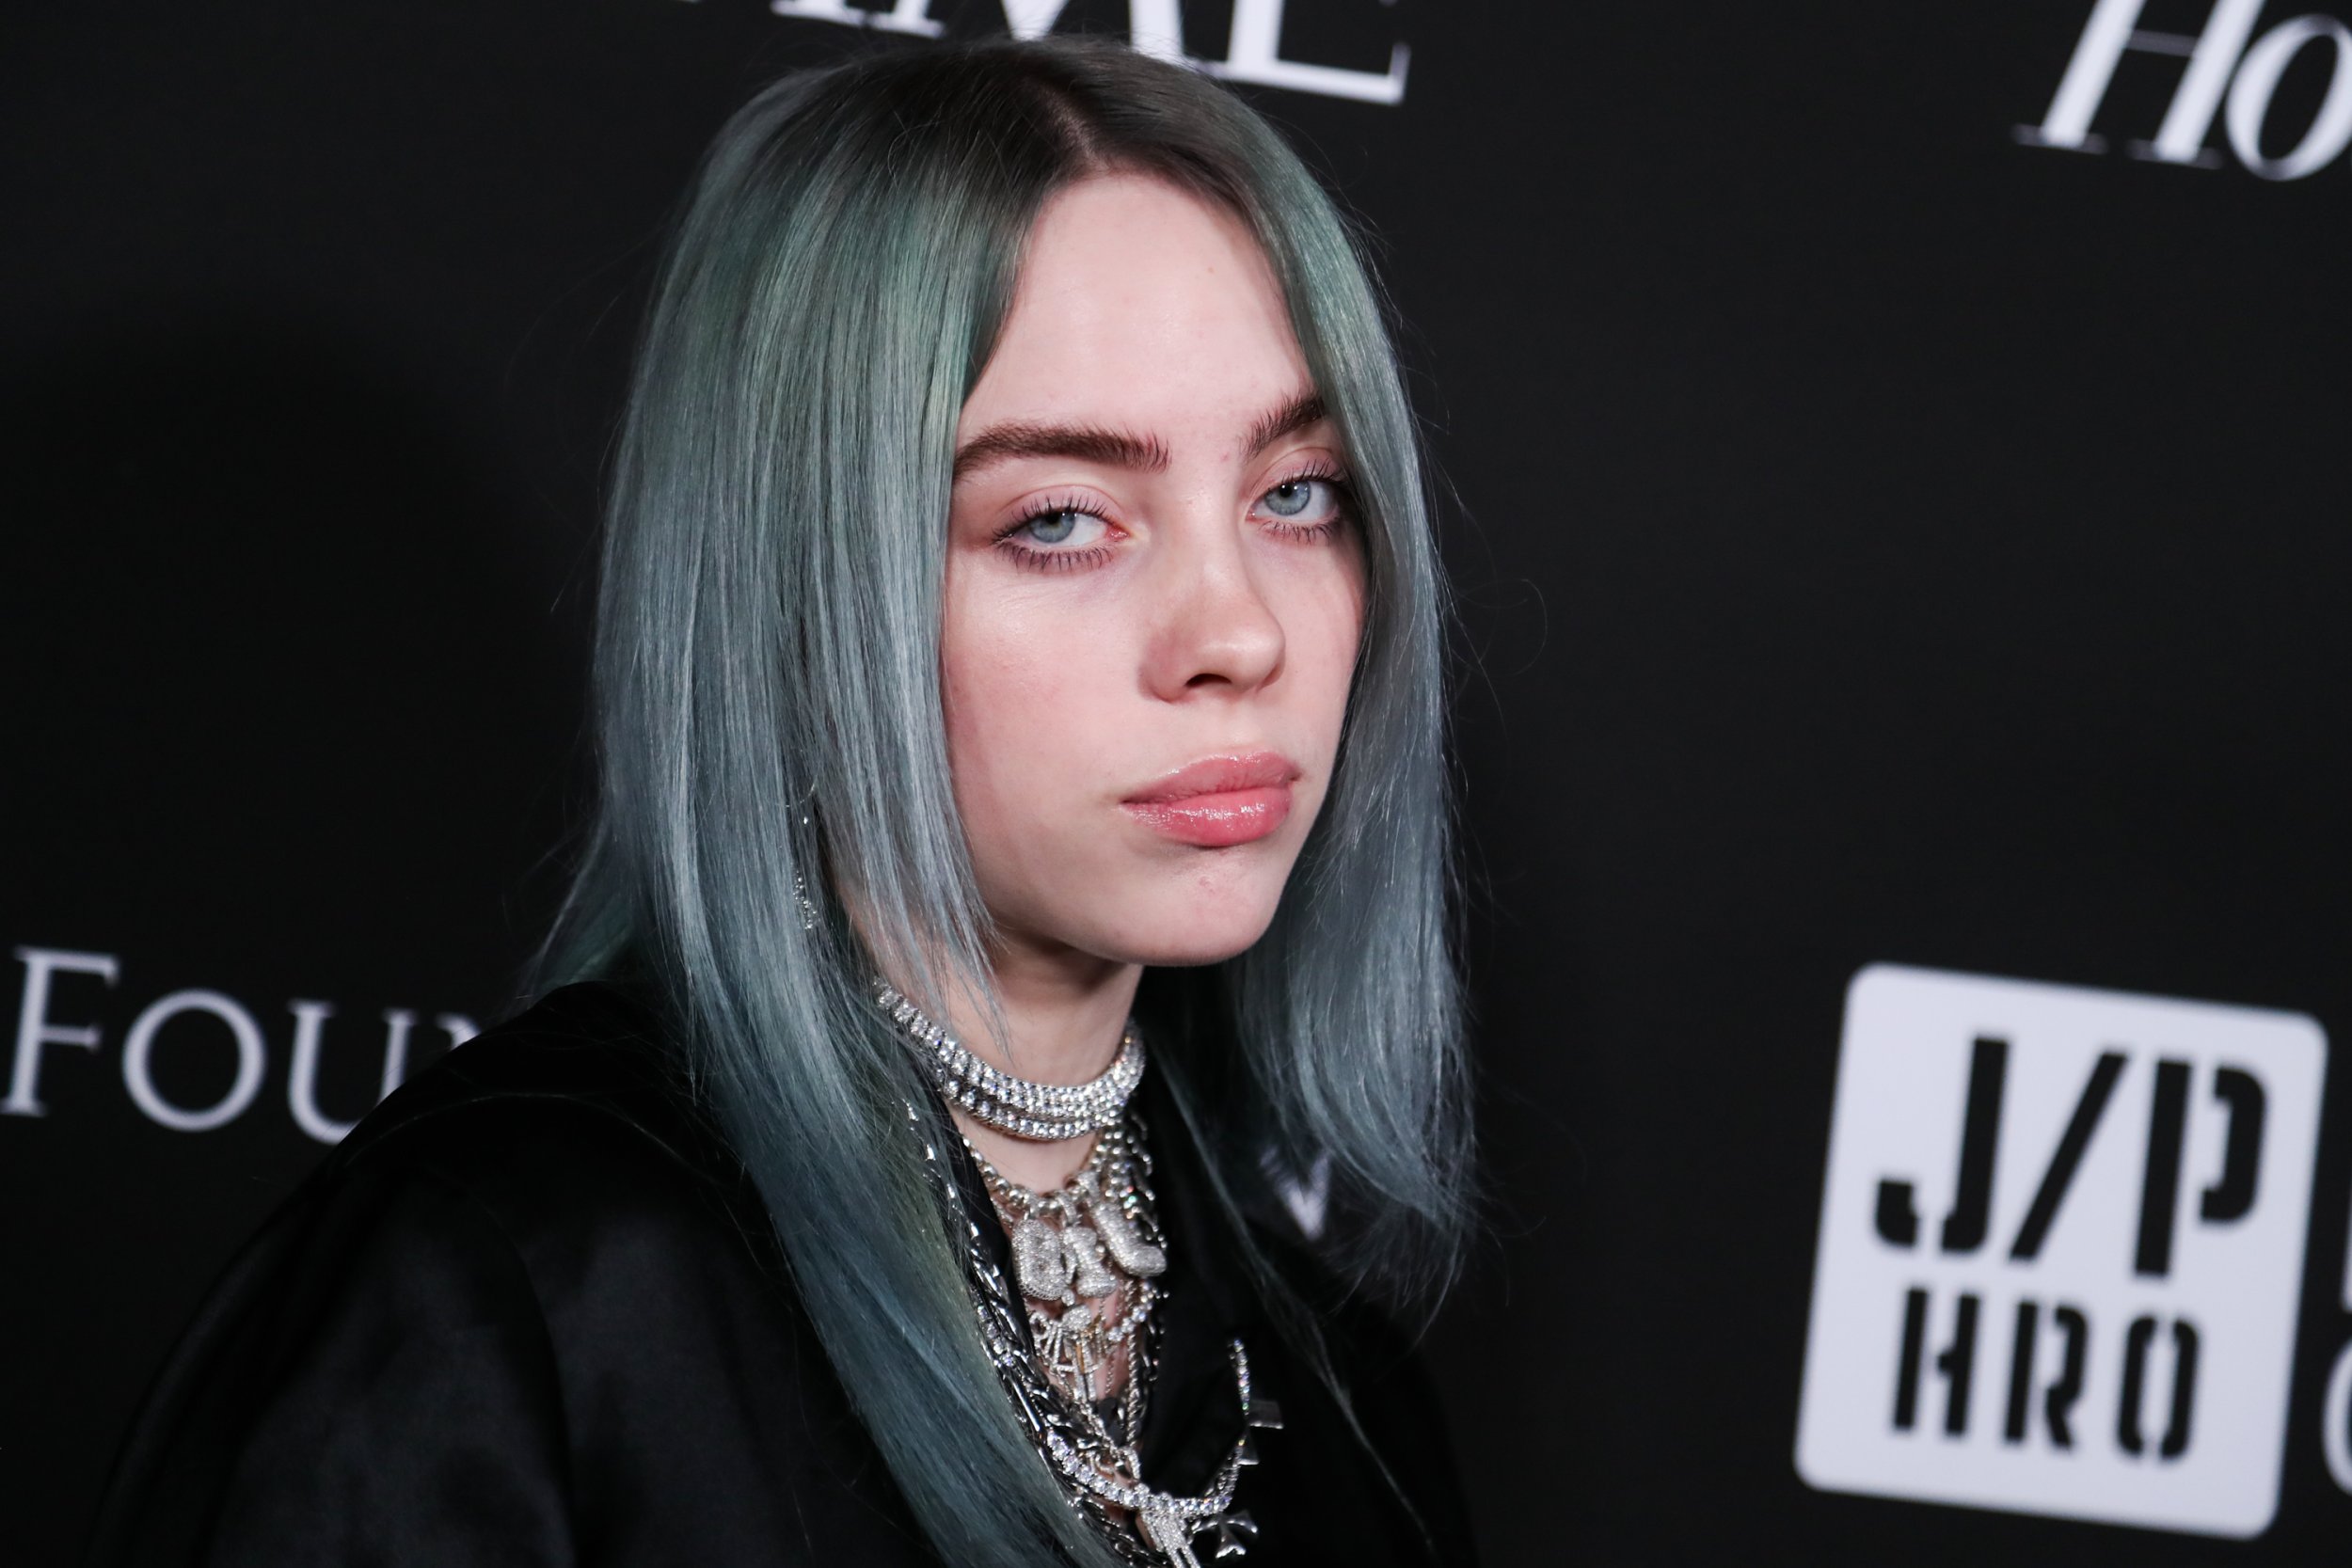 Billie Eilish's Blue Hair: A Sign of Her Growing Up or Selling Out? - wide 7